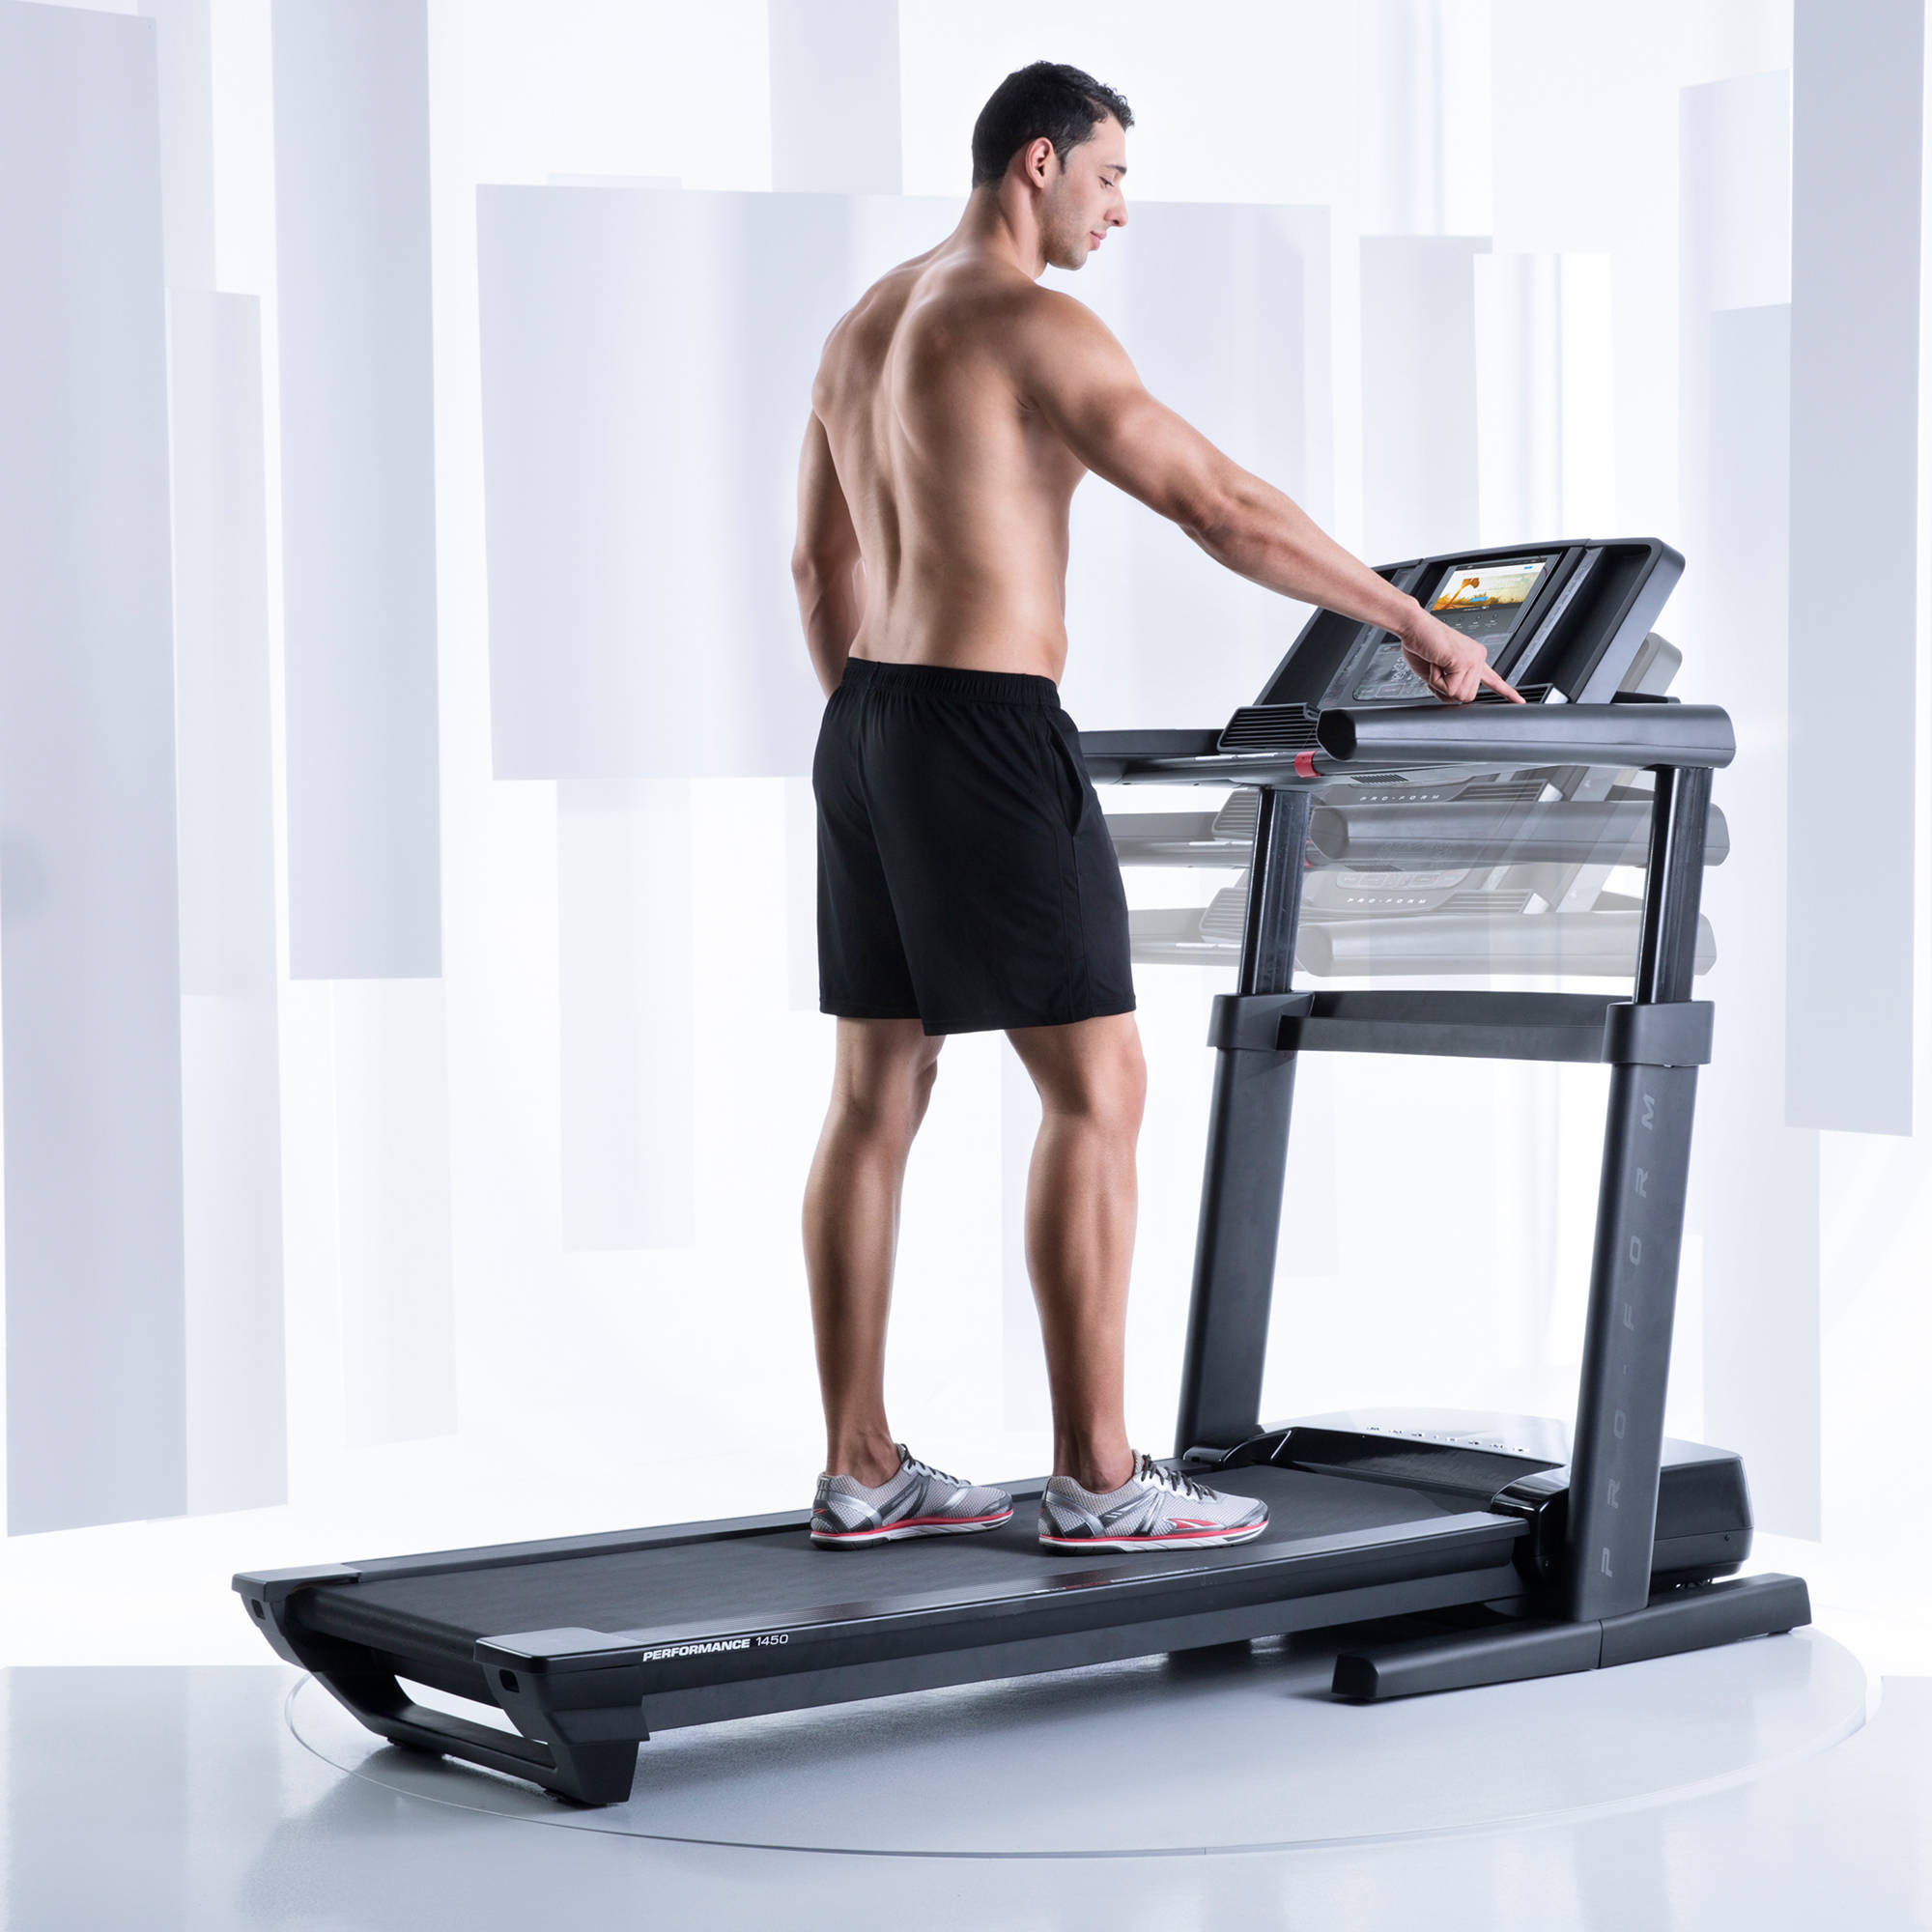 Profrom Performance 140 Treadmill - image 4 of 11